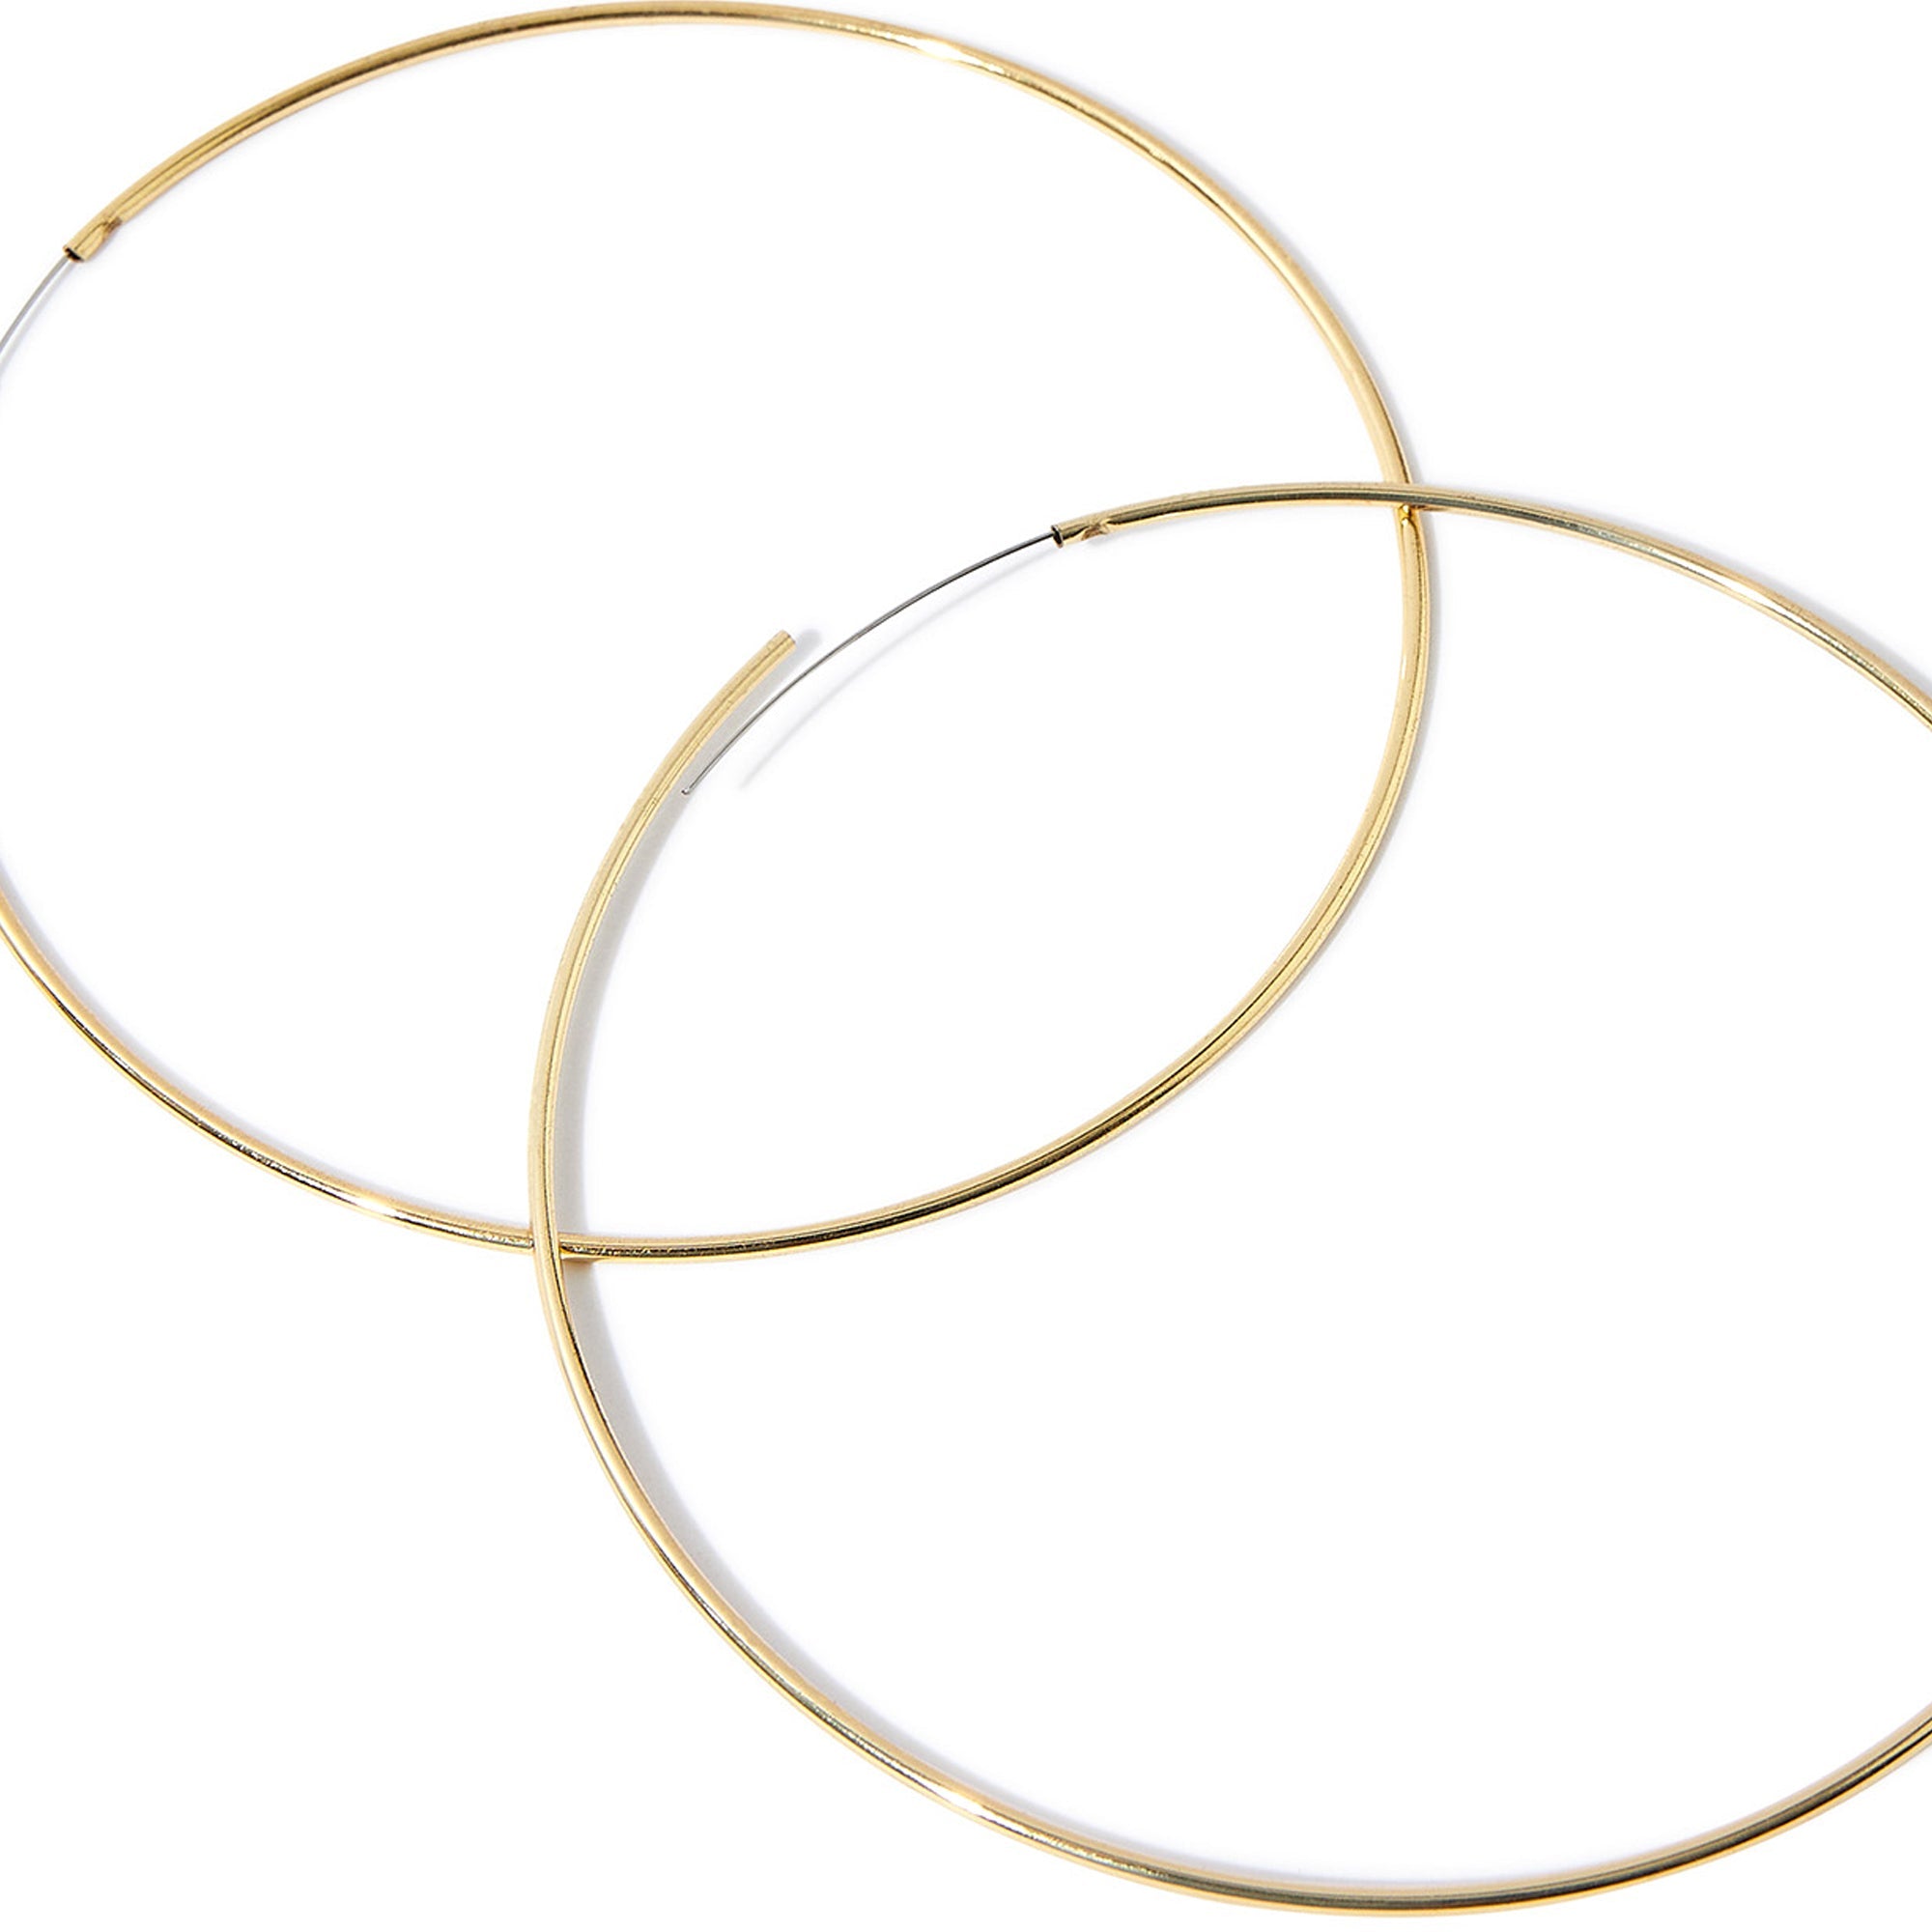 Real Gold Plated Z Thin Extra Large Hoop Earring For Women By Accessorize London